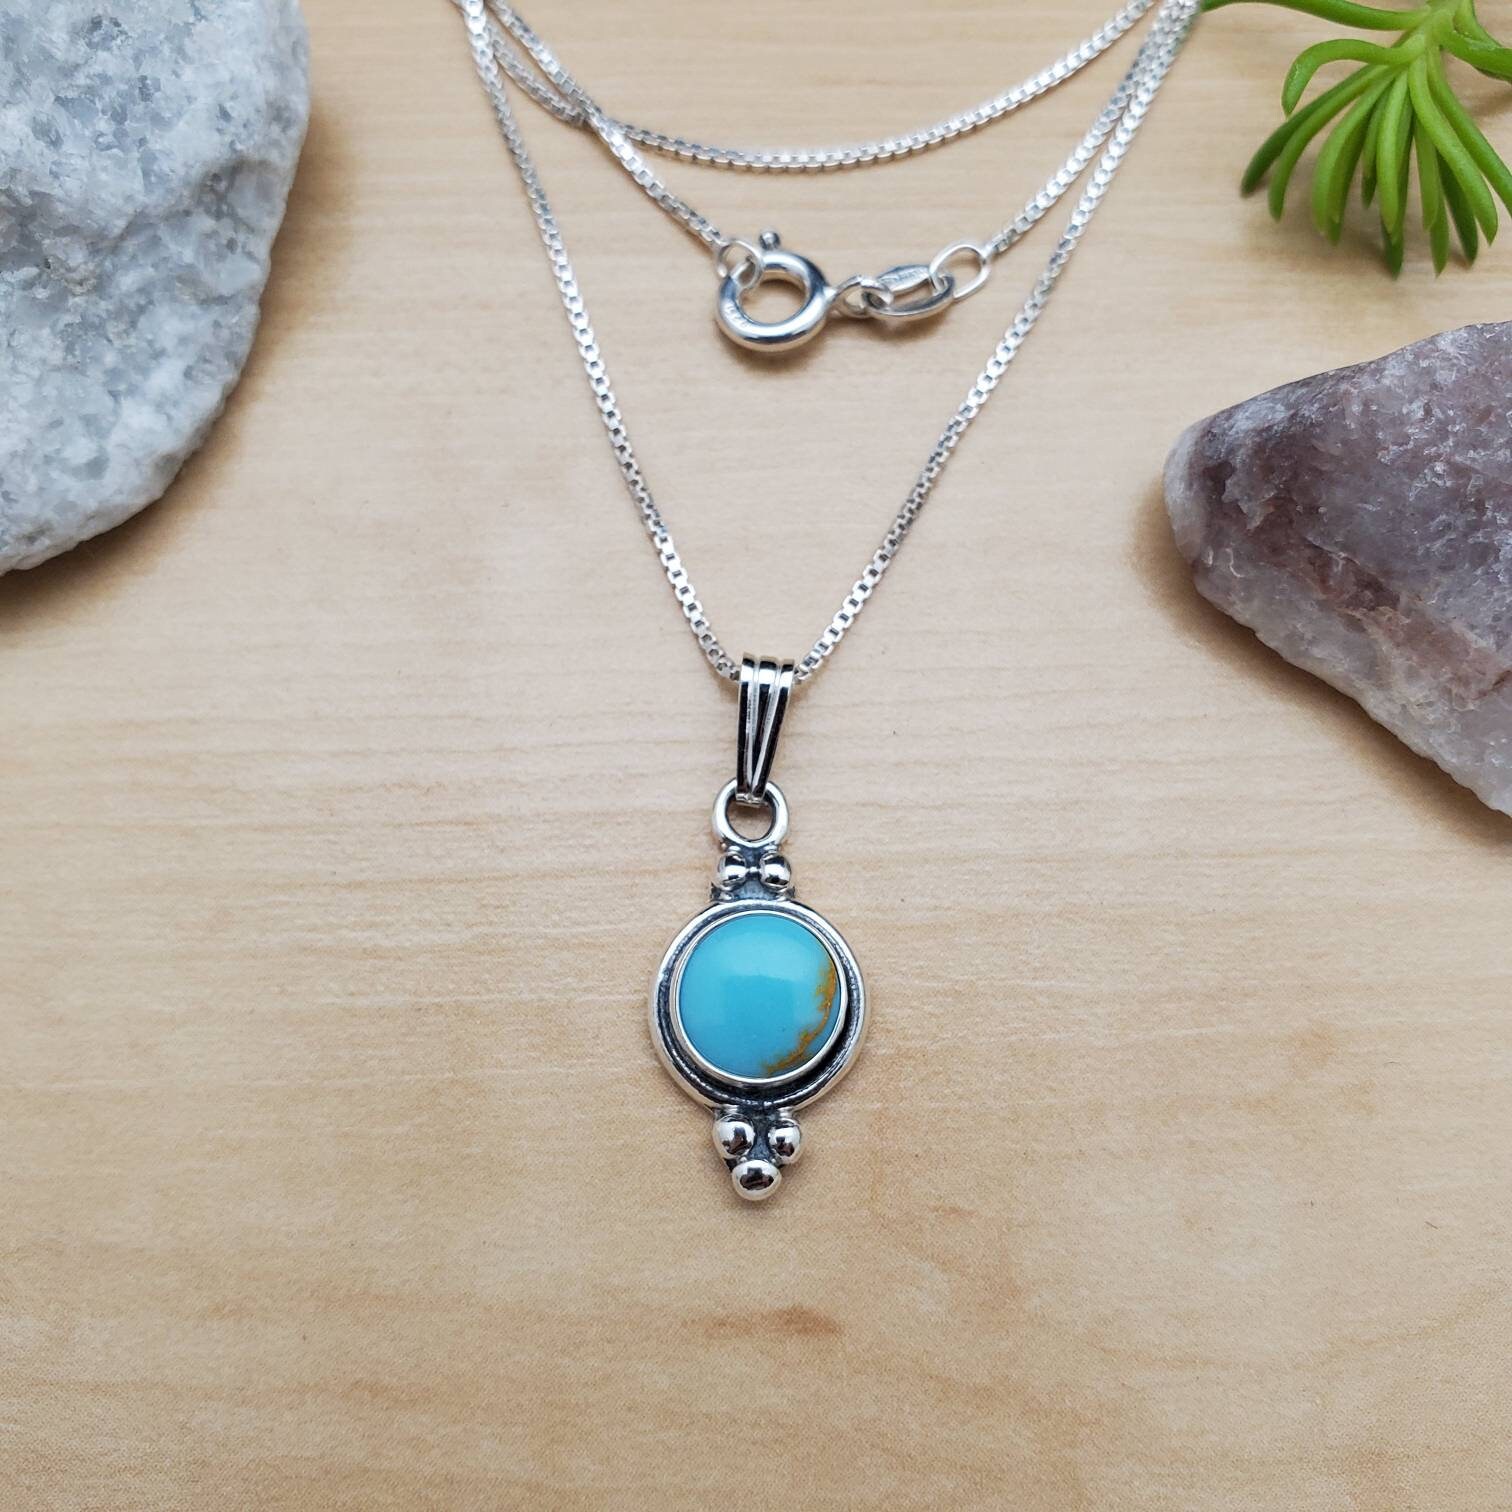 Socute925 Kingman Turquoise Necklace Pendant With Silver Box - Etsy